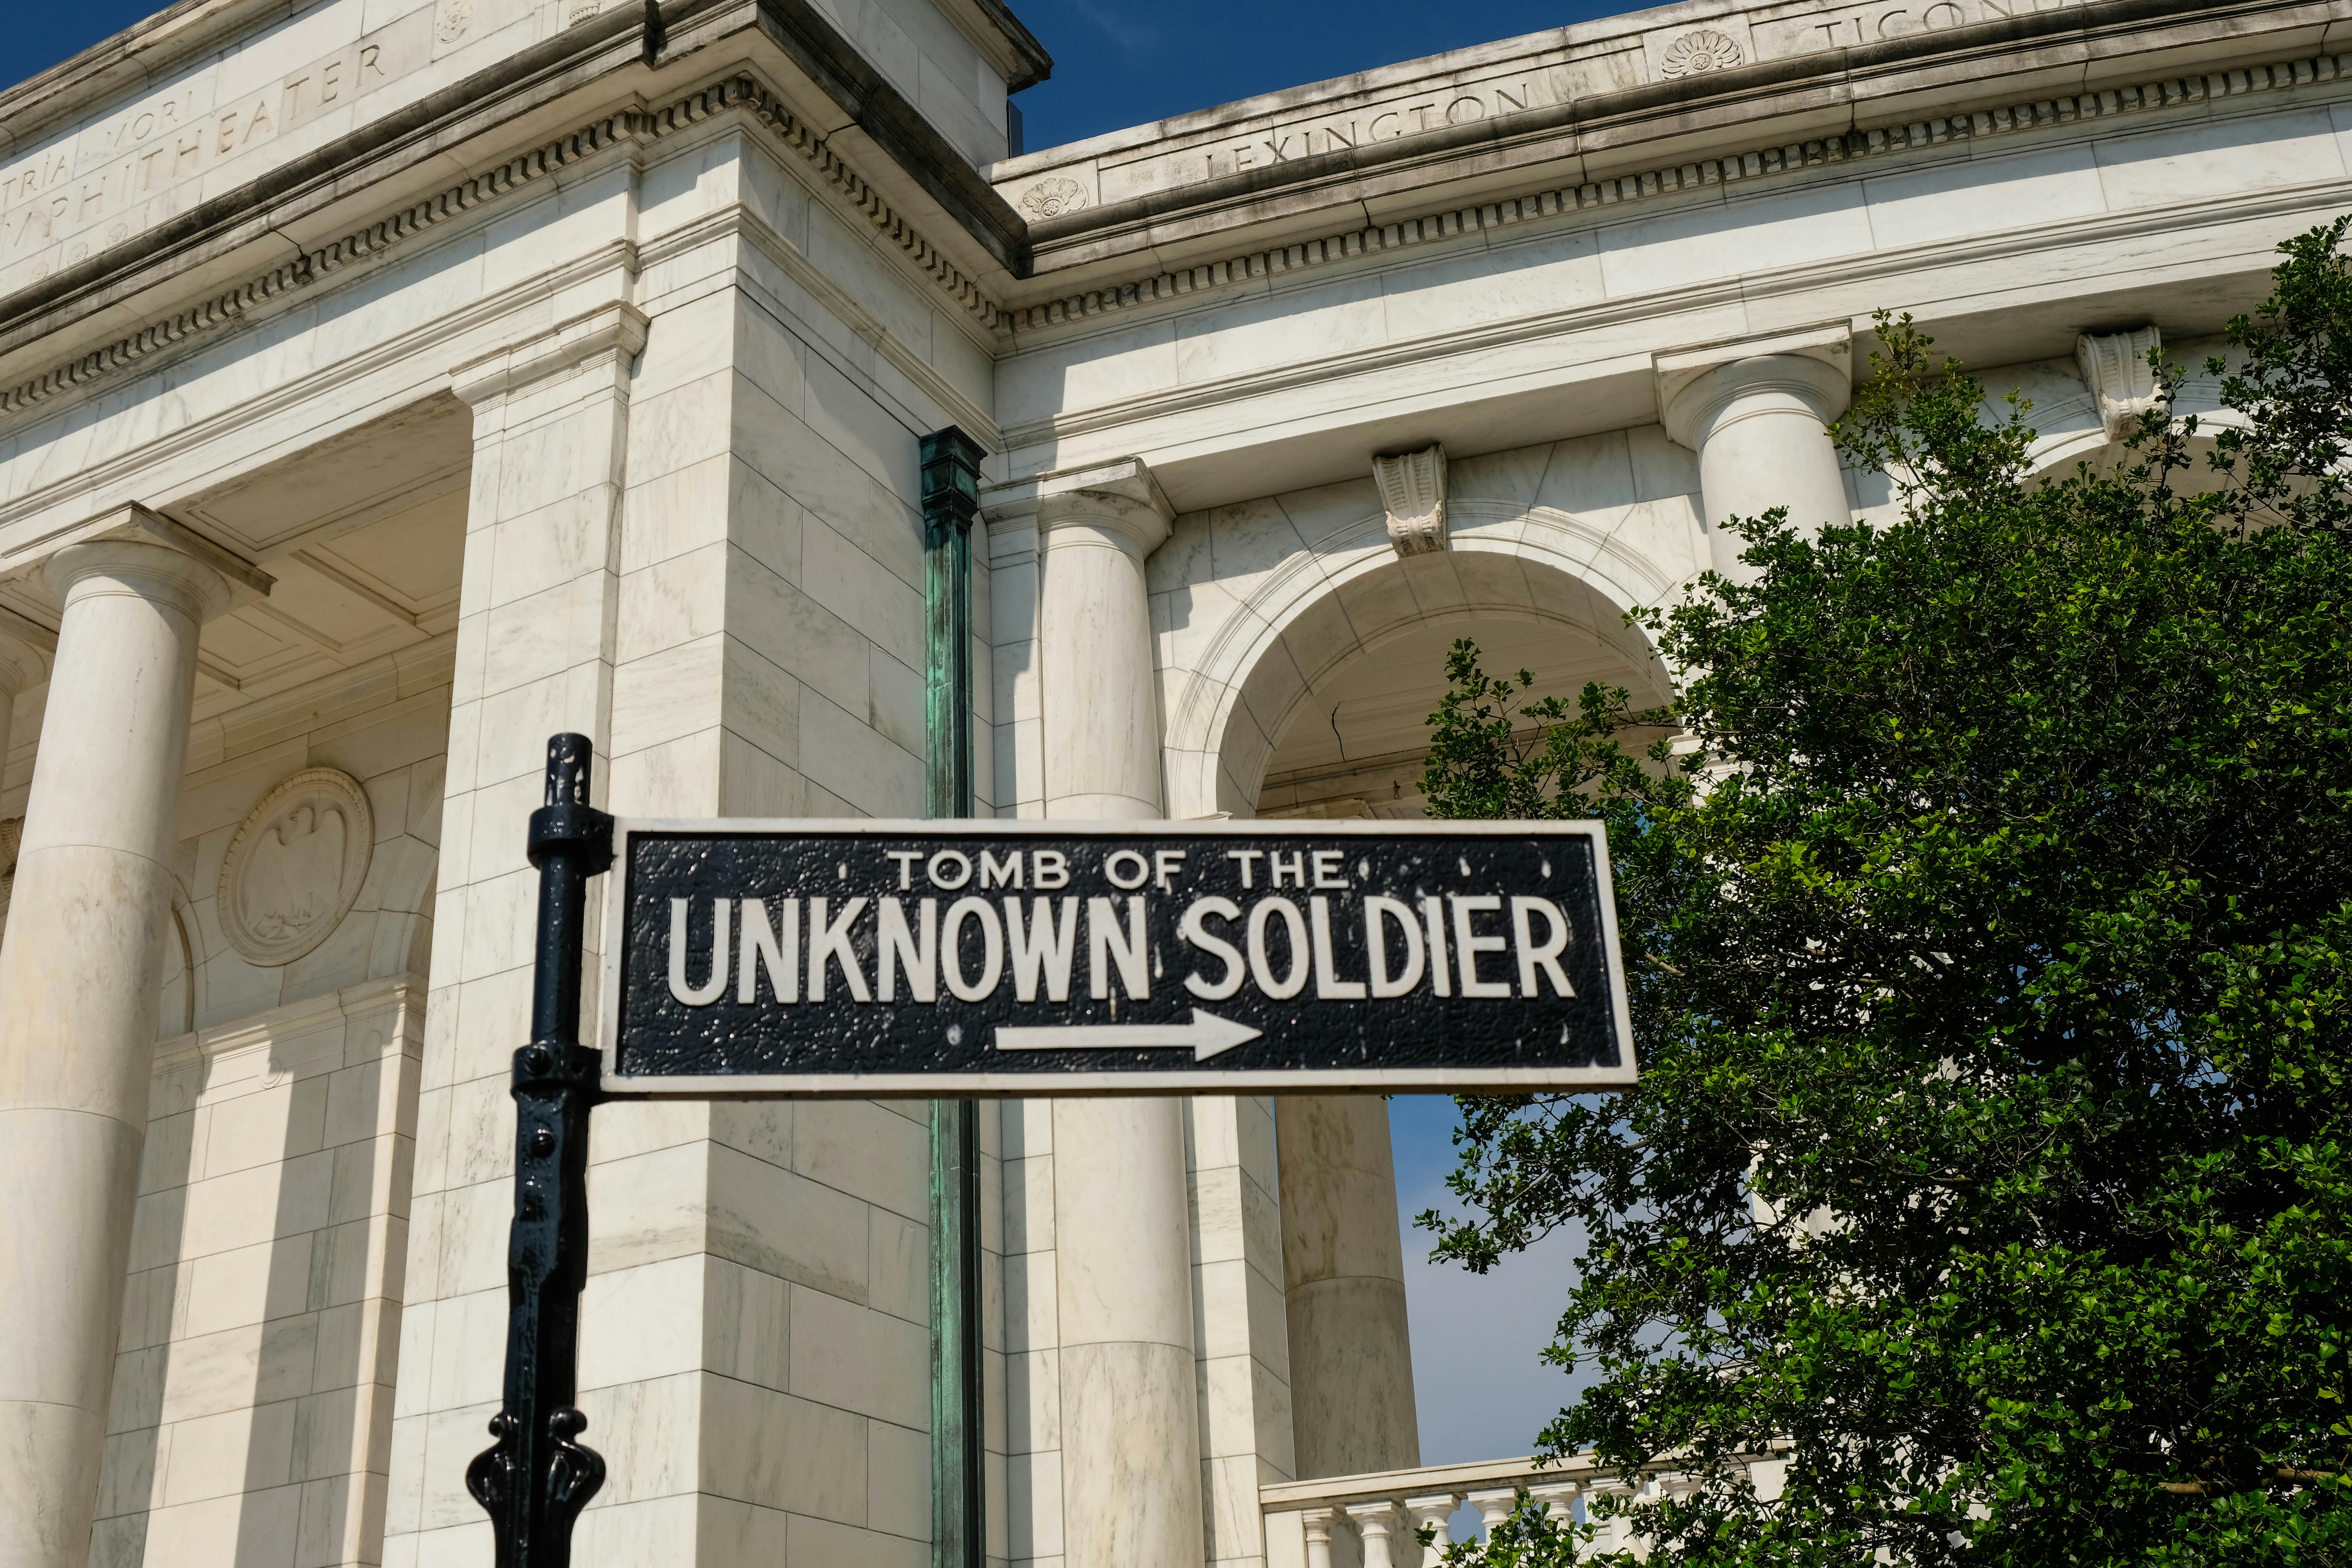 A sign pointing which way to walk around the coliseum at the Arlington National Cemetery where you'll find the Tomb of the Unknown Soldier. - Arlington, VA - Sara Cottle